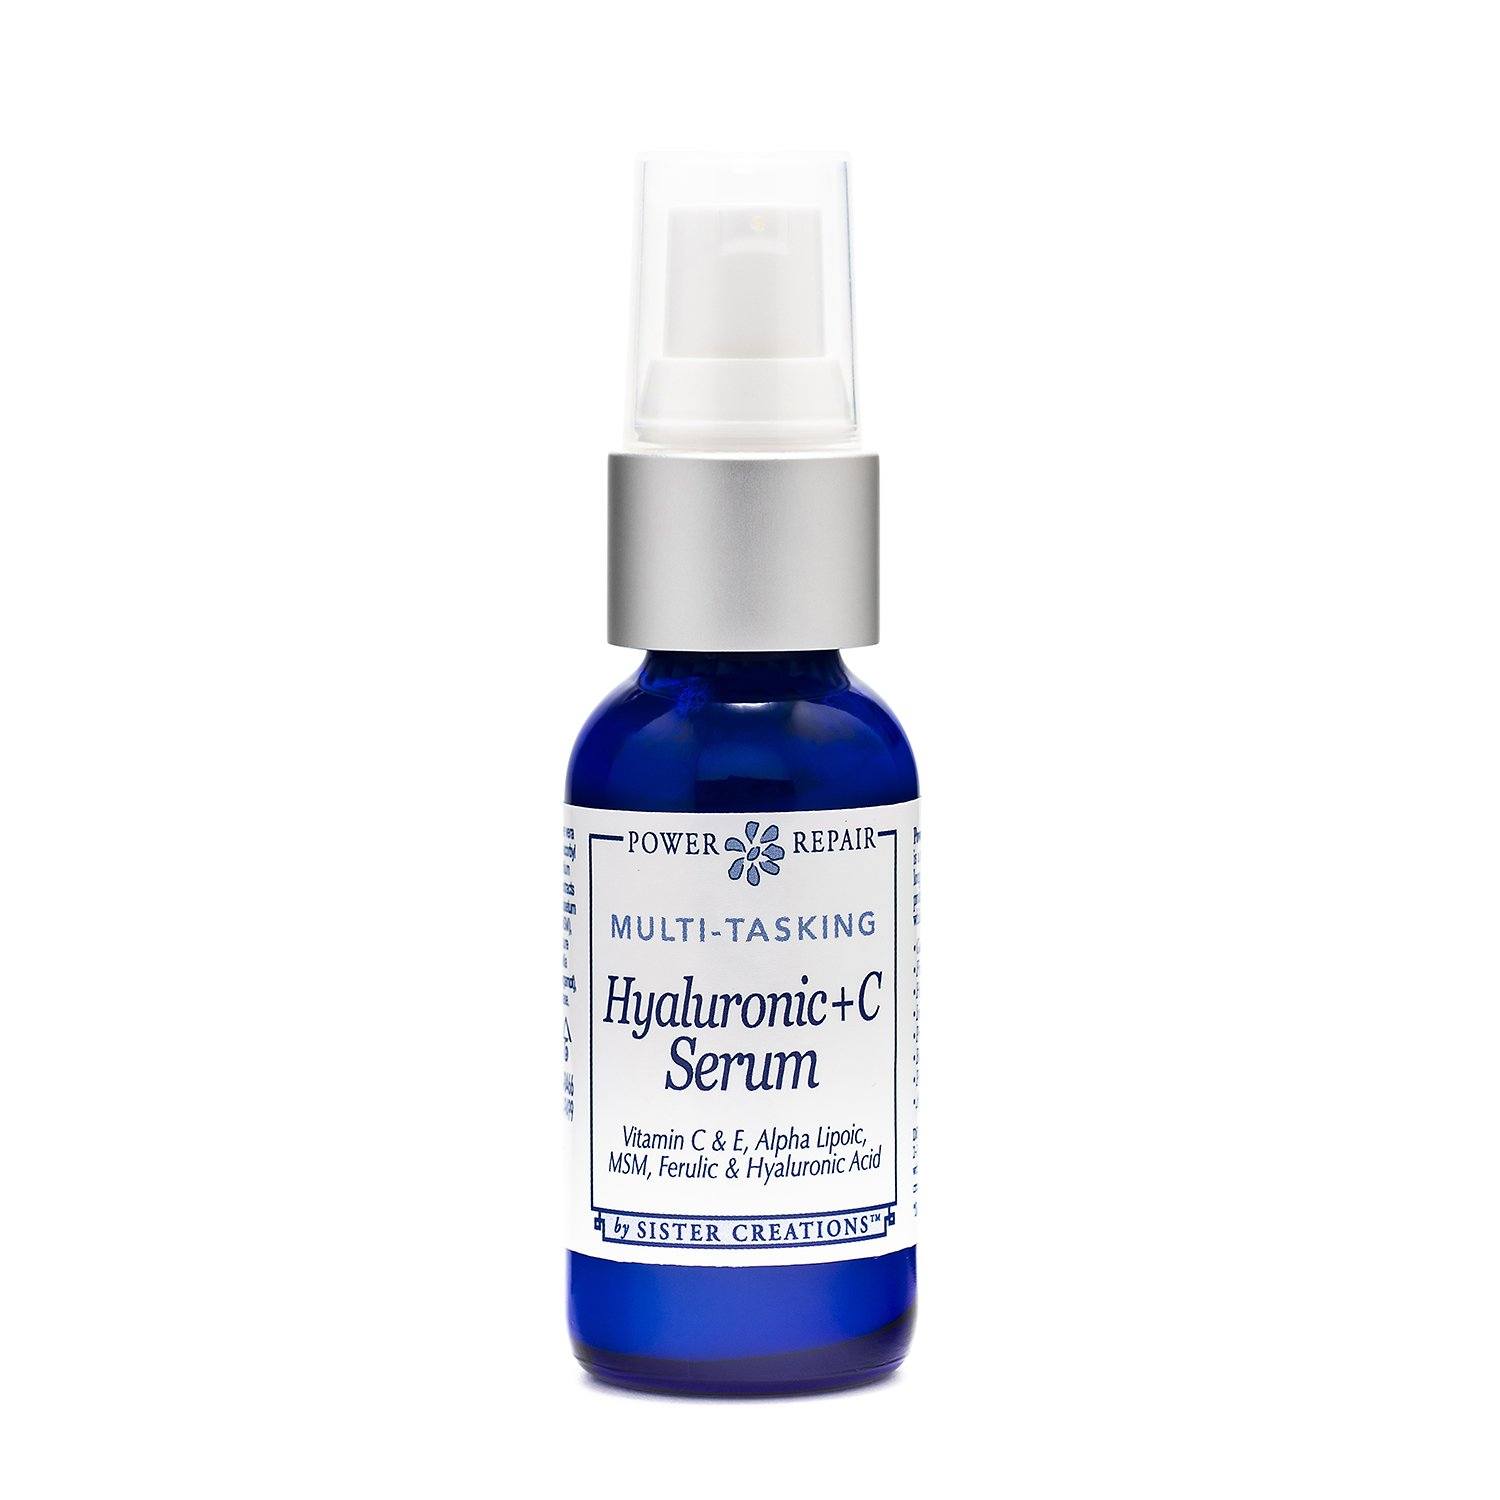 Shop,Brands,Face,New Products - Power Repair Hyaluronic + C Serum